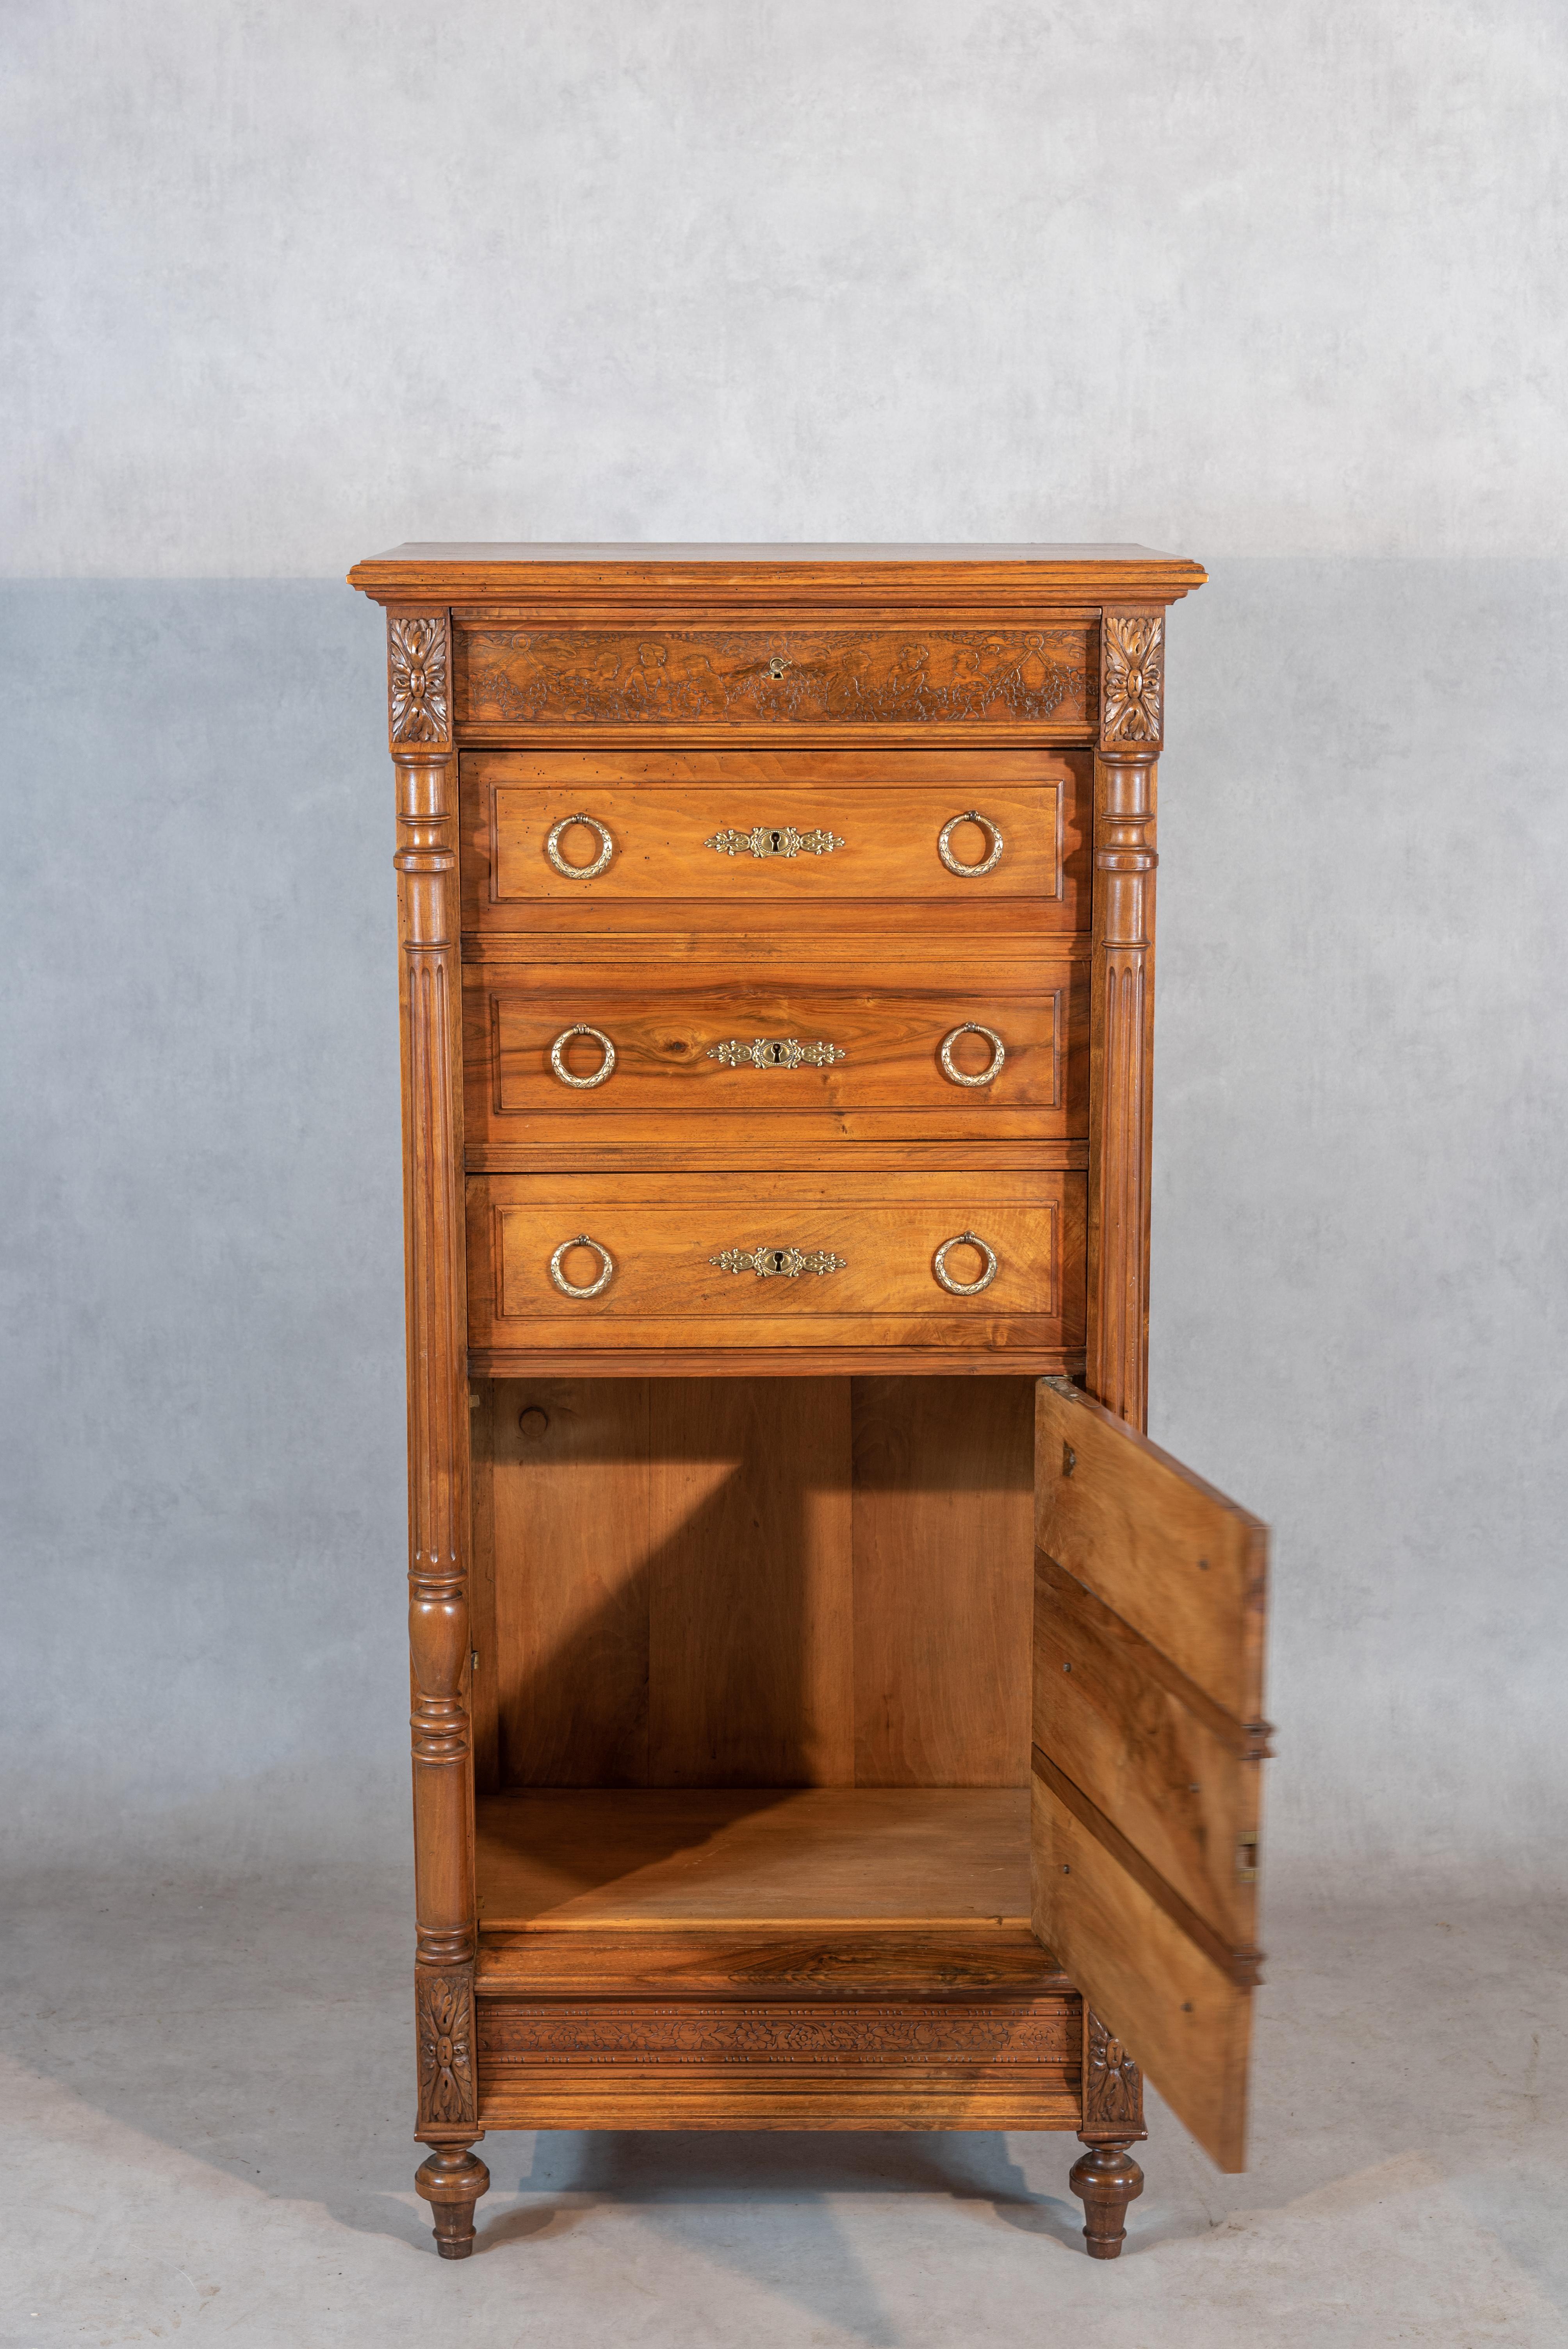 This 19th century Louis XVI Style Semainier Chest is an exceptional piece that showcases the beauty and craftsmanship of the era. Crafted in the style of Louis XVI, it is a true testament to the elegance and refinement of that period. The chest